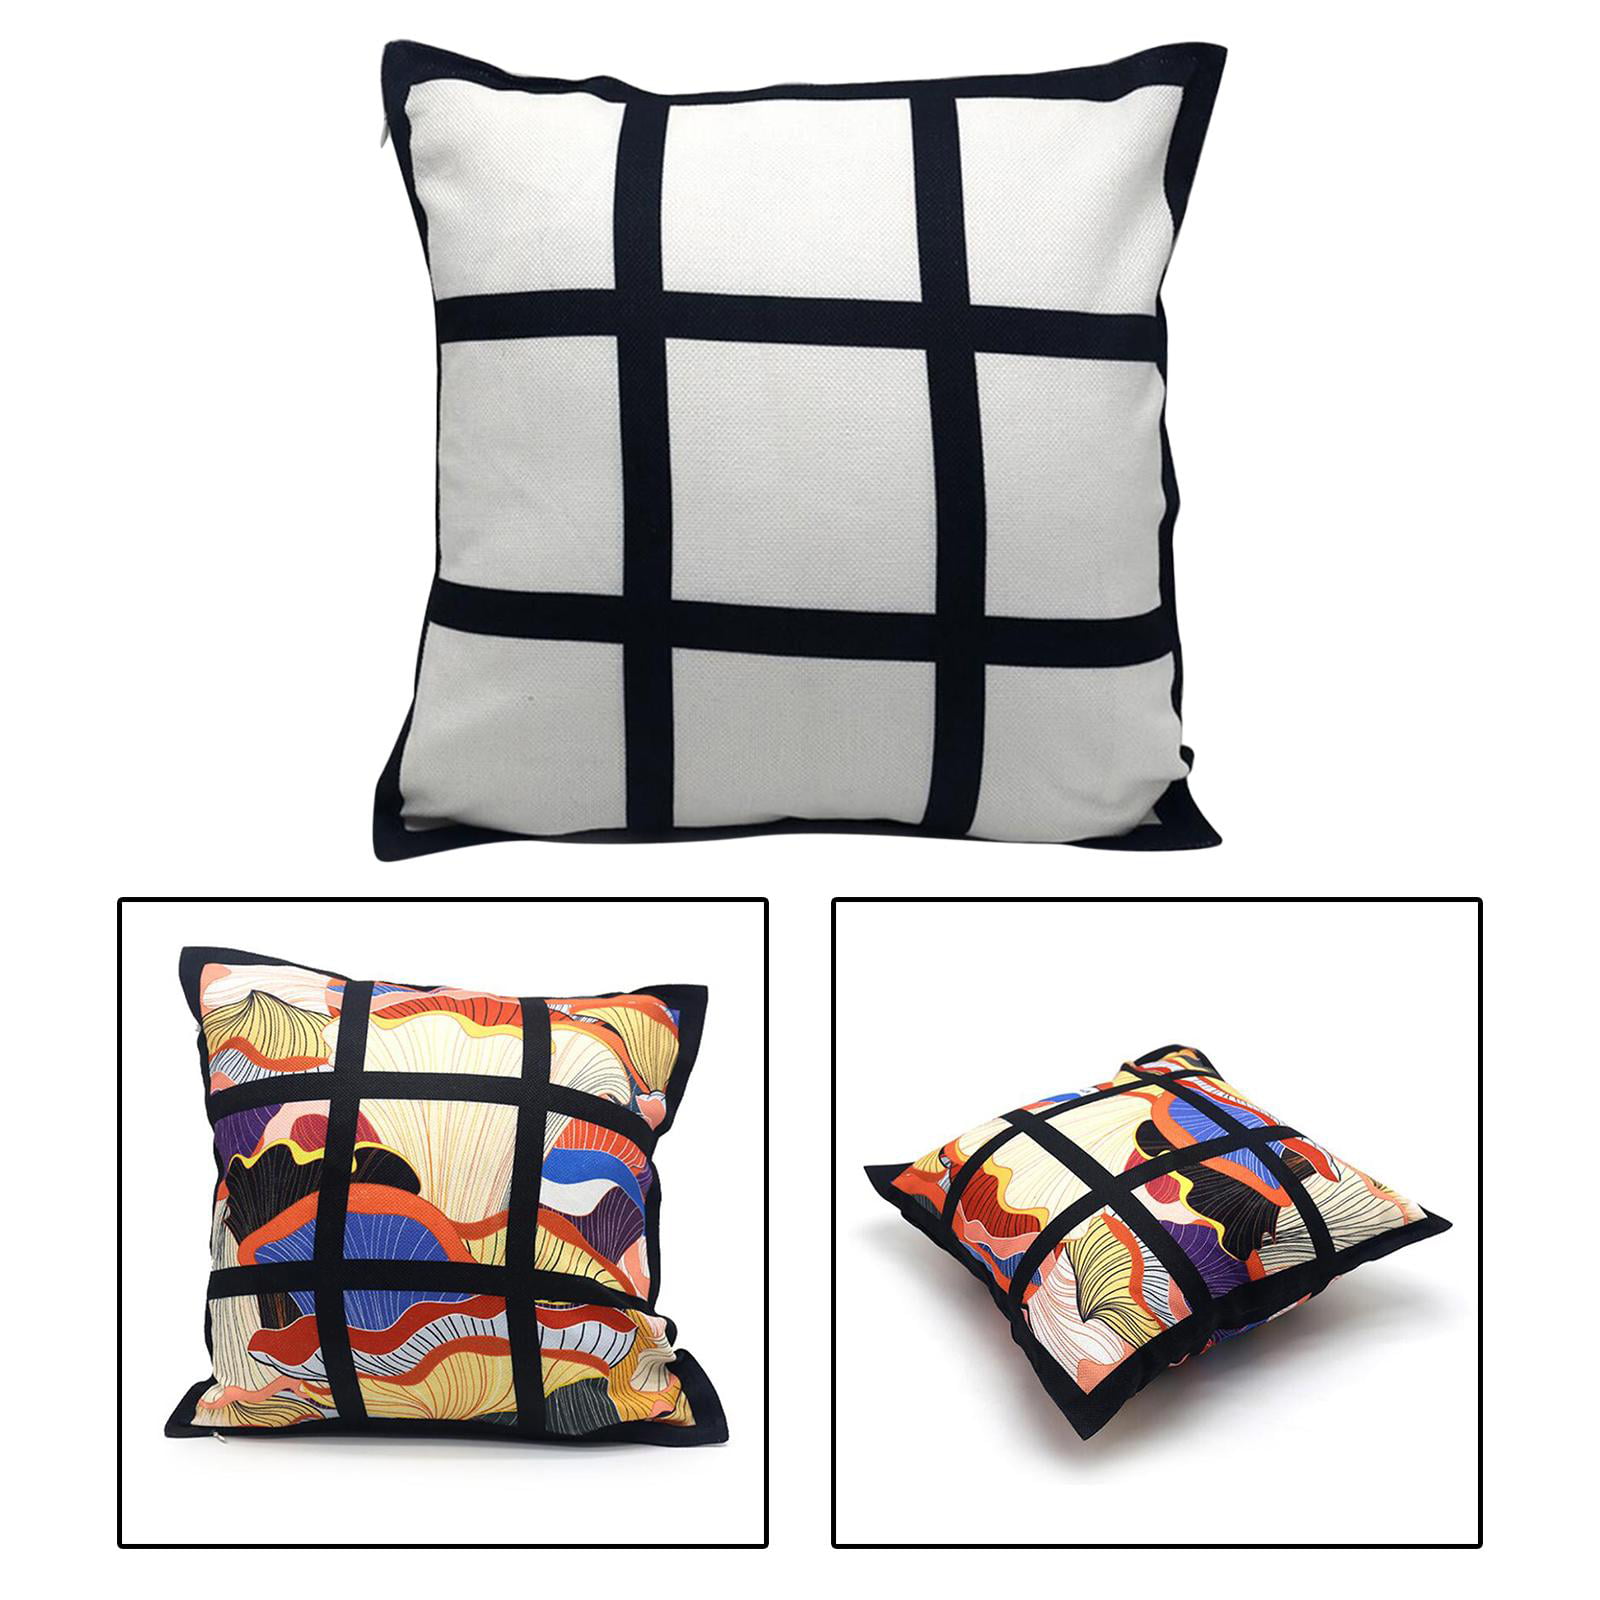 Double-Sided Indoor Sublimation Pillow